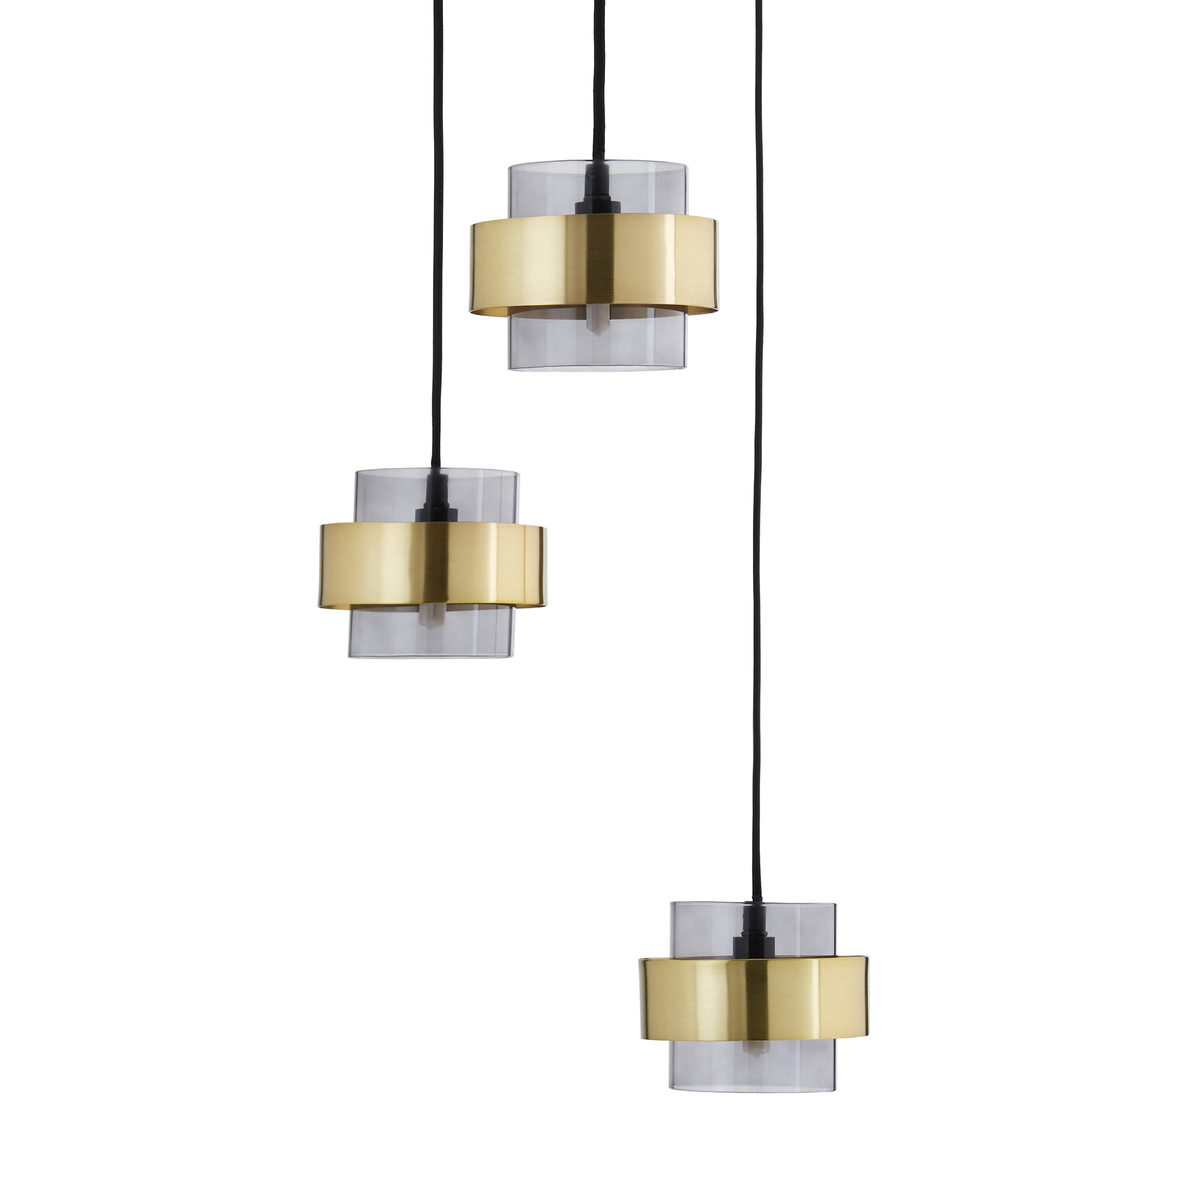 Botello Smoked Glass & Brass Cluster Ceiling Light